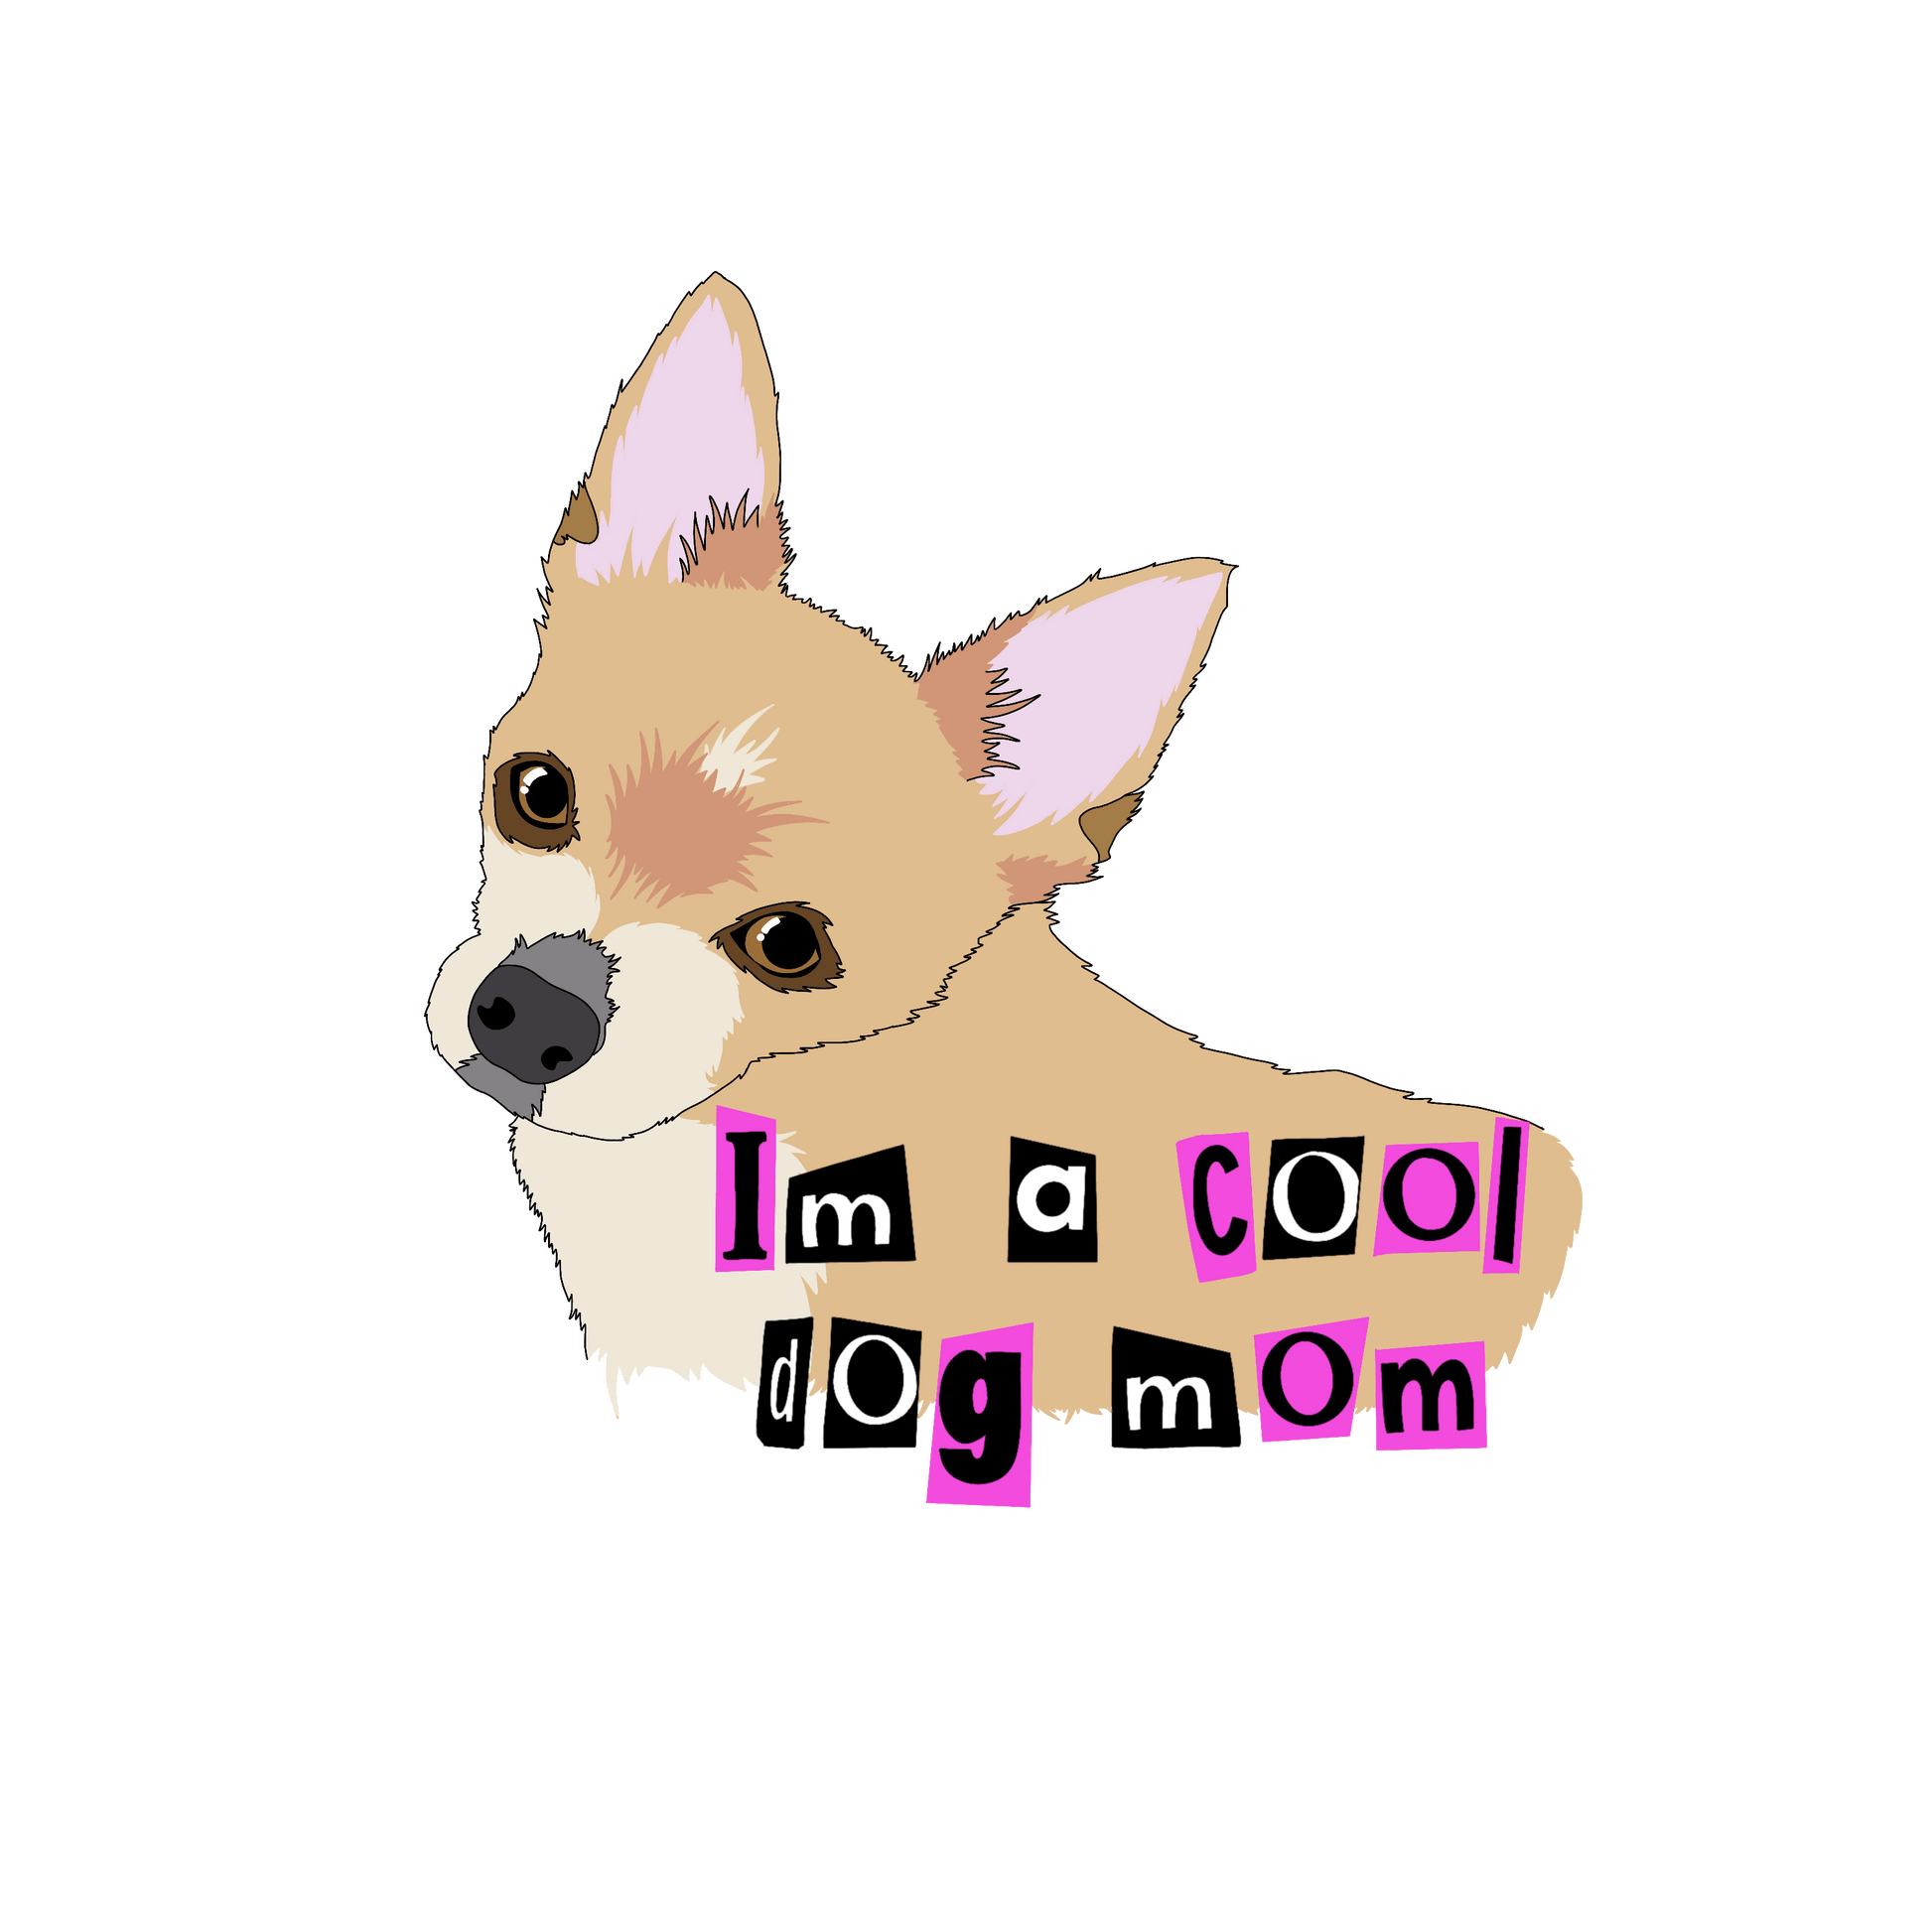 sticker of chihuahua dog with text that says i'm a cool dog mom